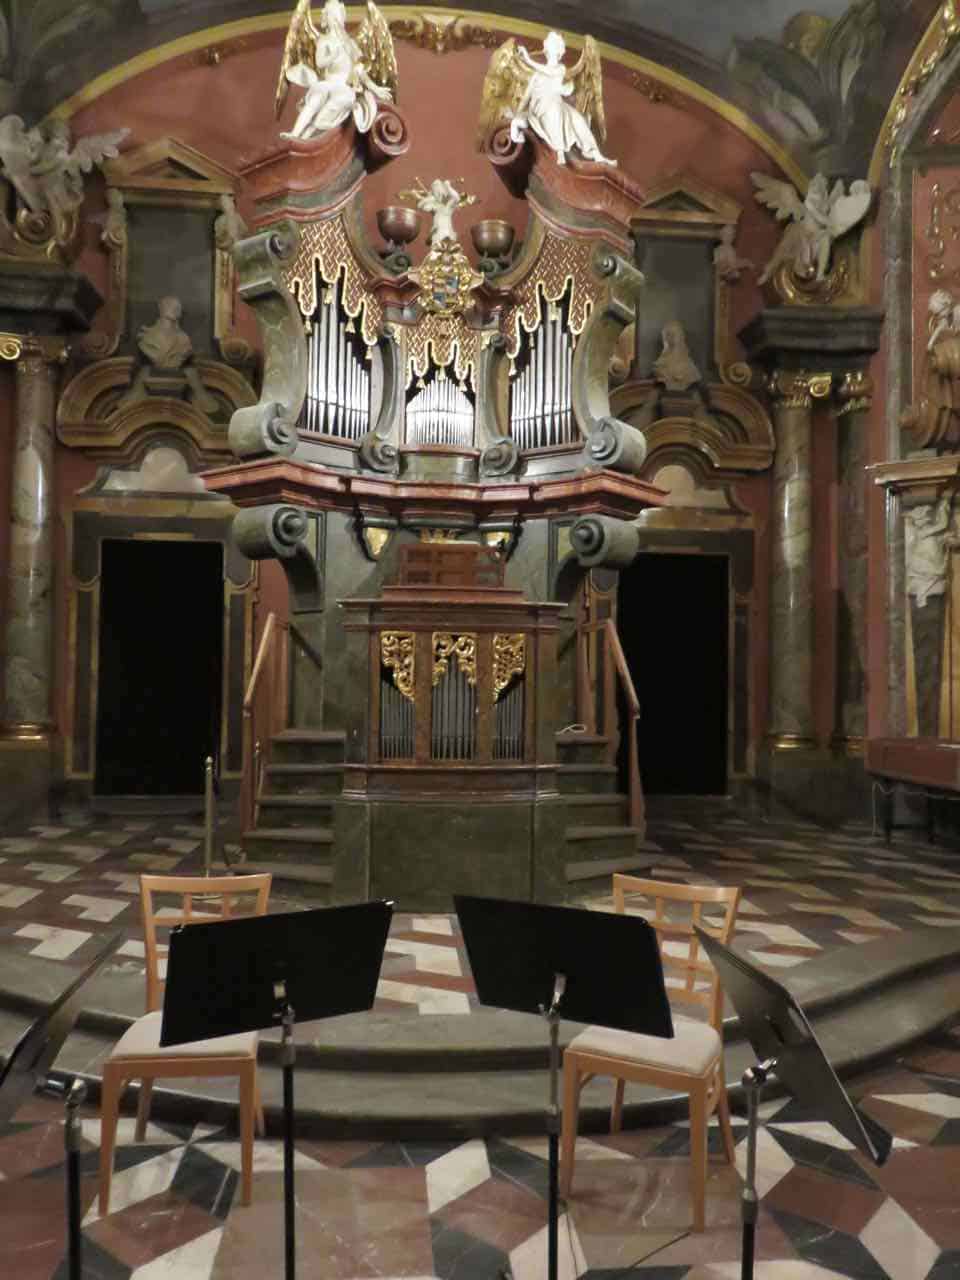 pipe organ in the center of an ornate chapel in prague